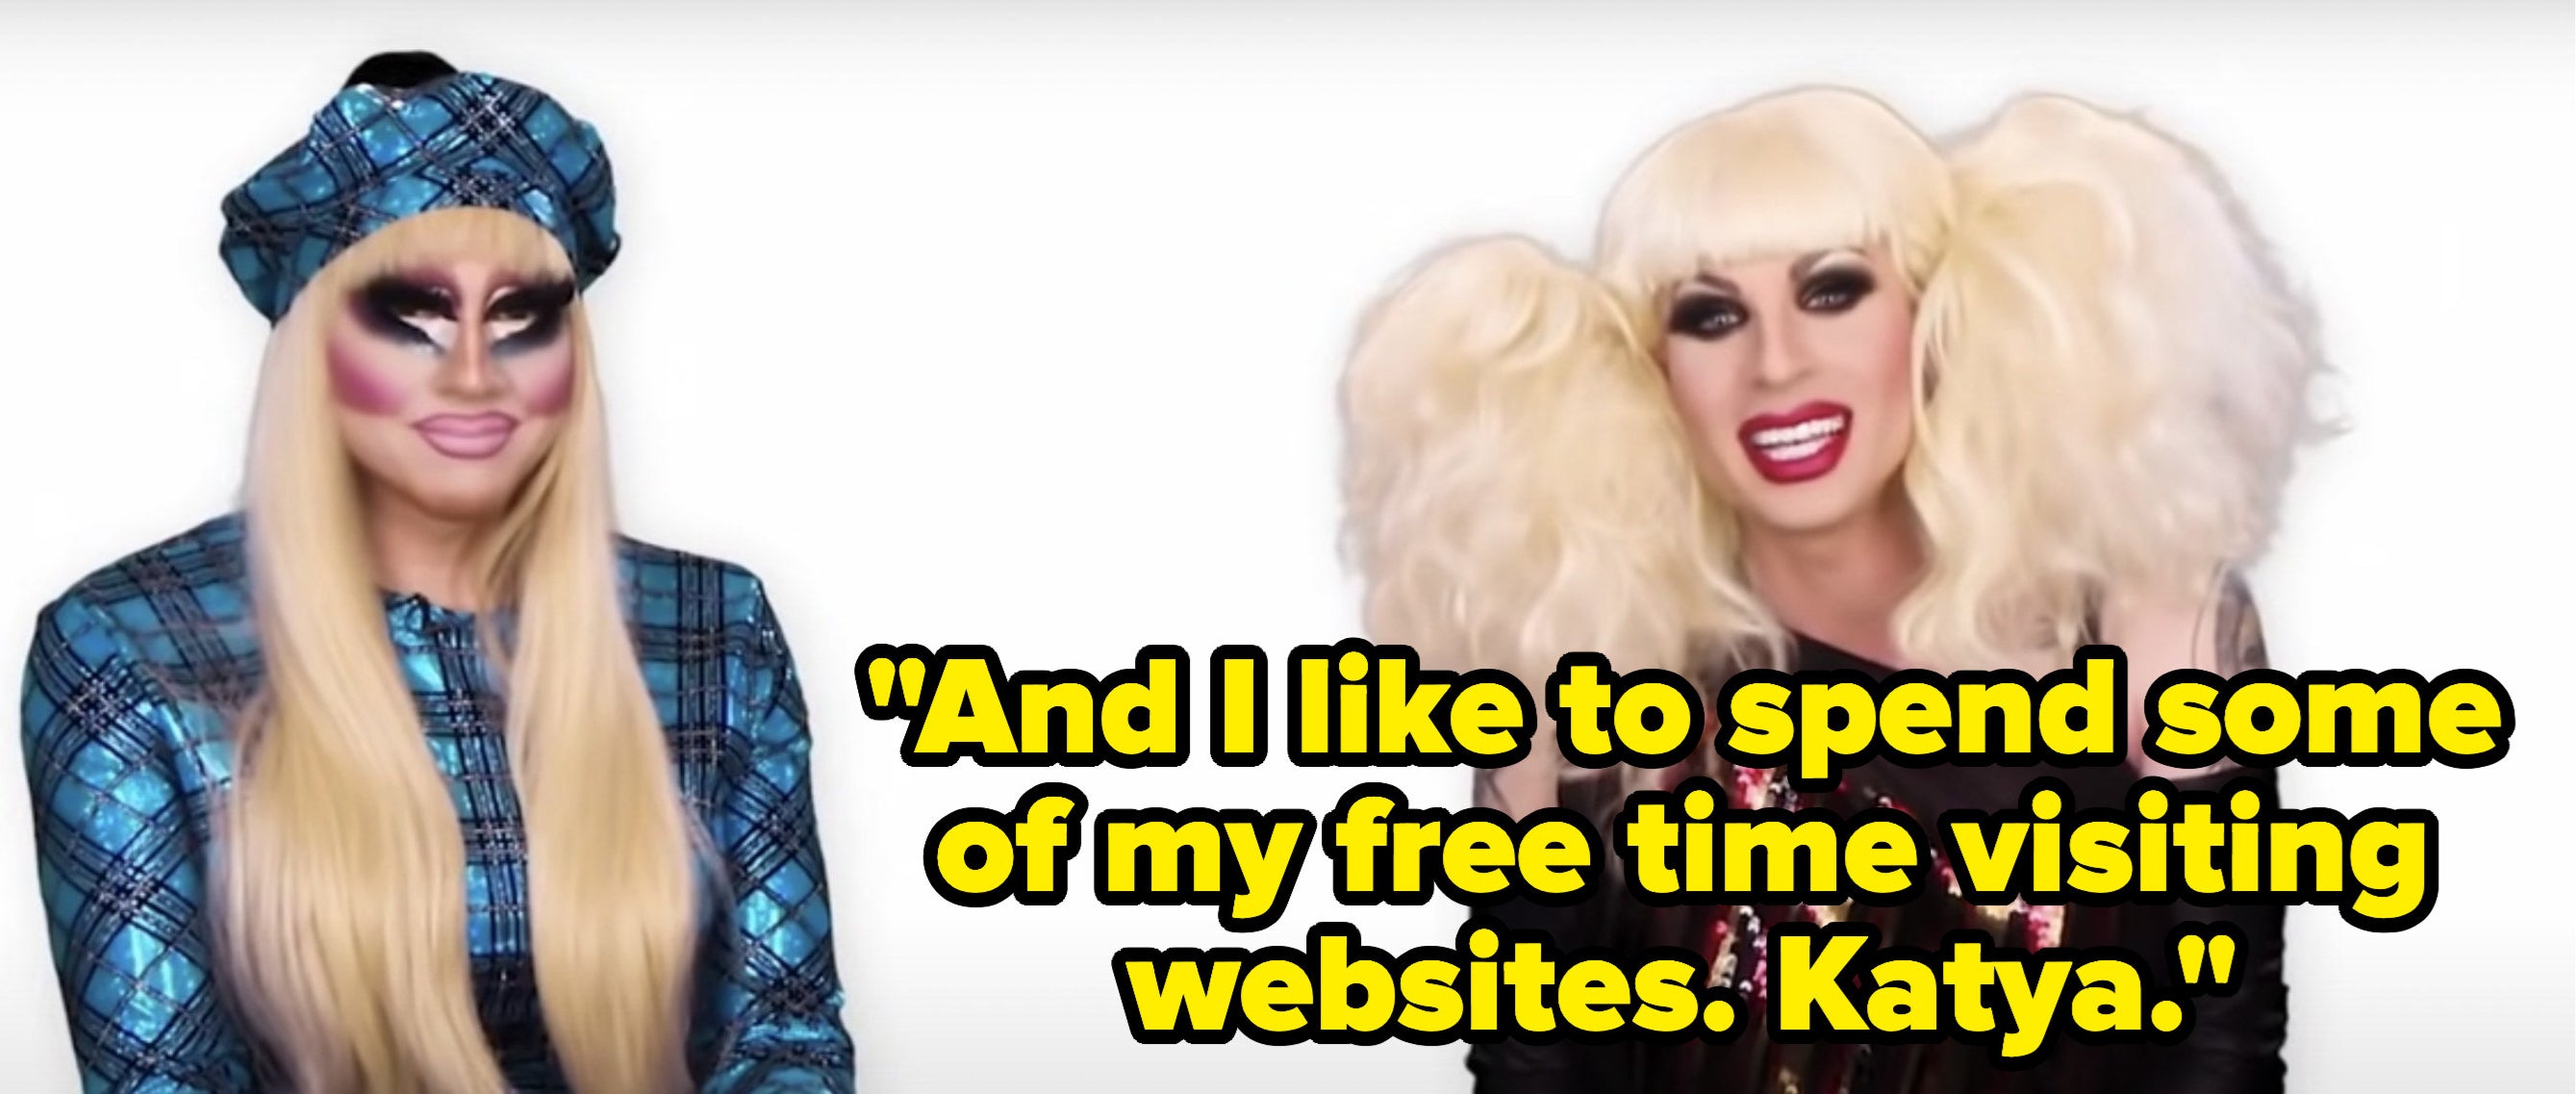 Katya says, And I like to spend some of my free time visiting websites, Katya